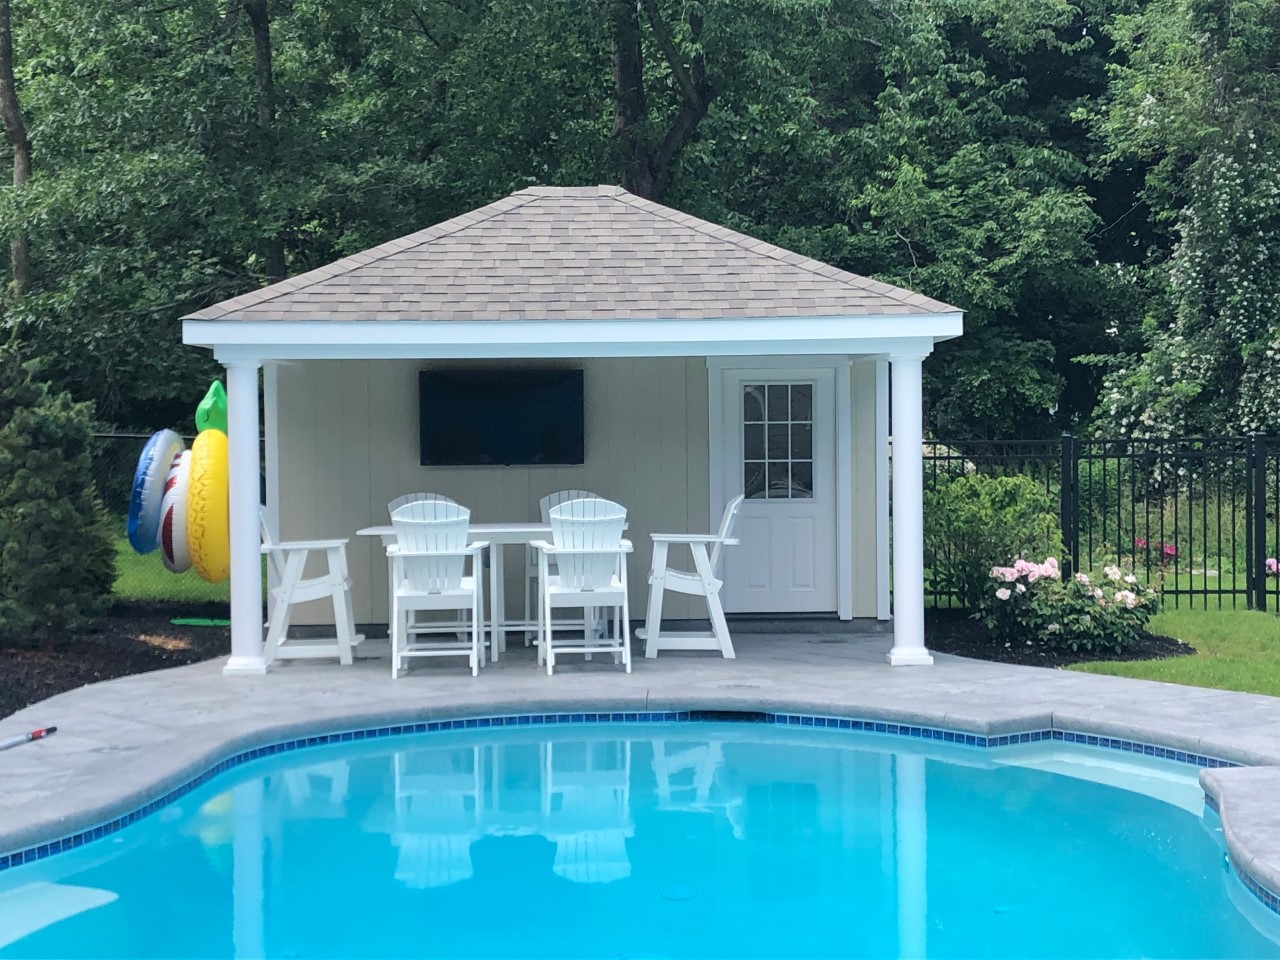 Pool House Pavilion - Scituate